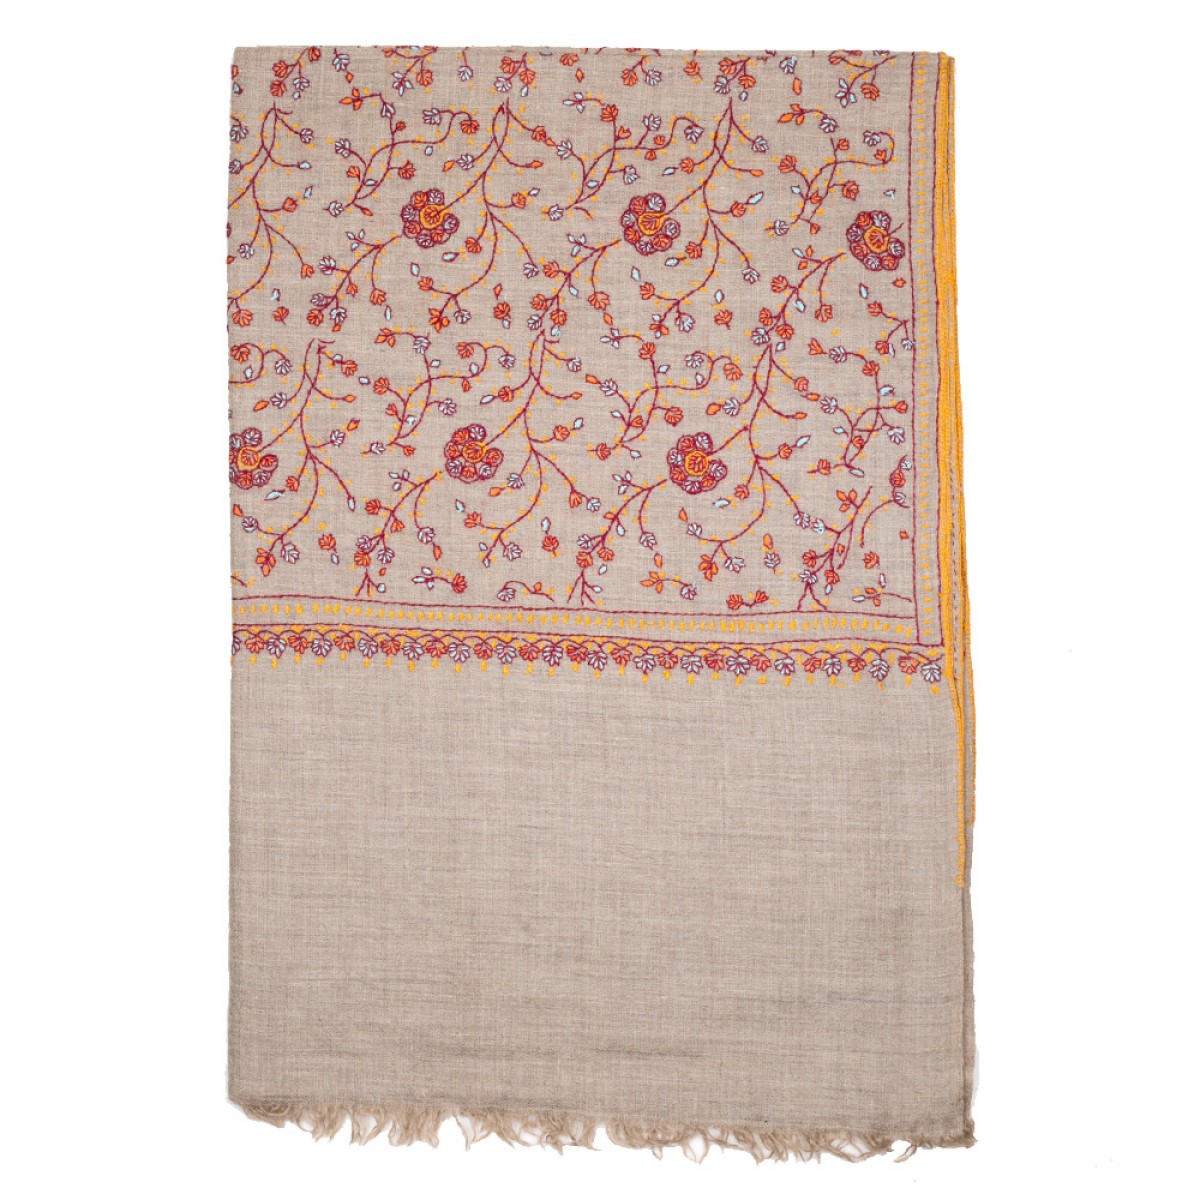 Embroidered Pashmina Stole - Natural & Burgundy